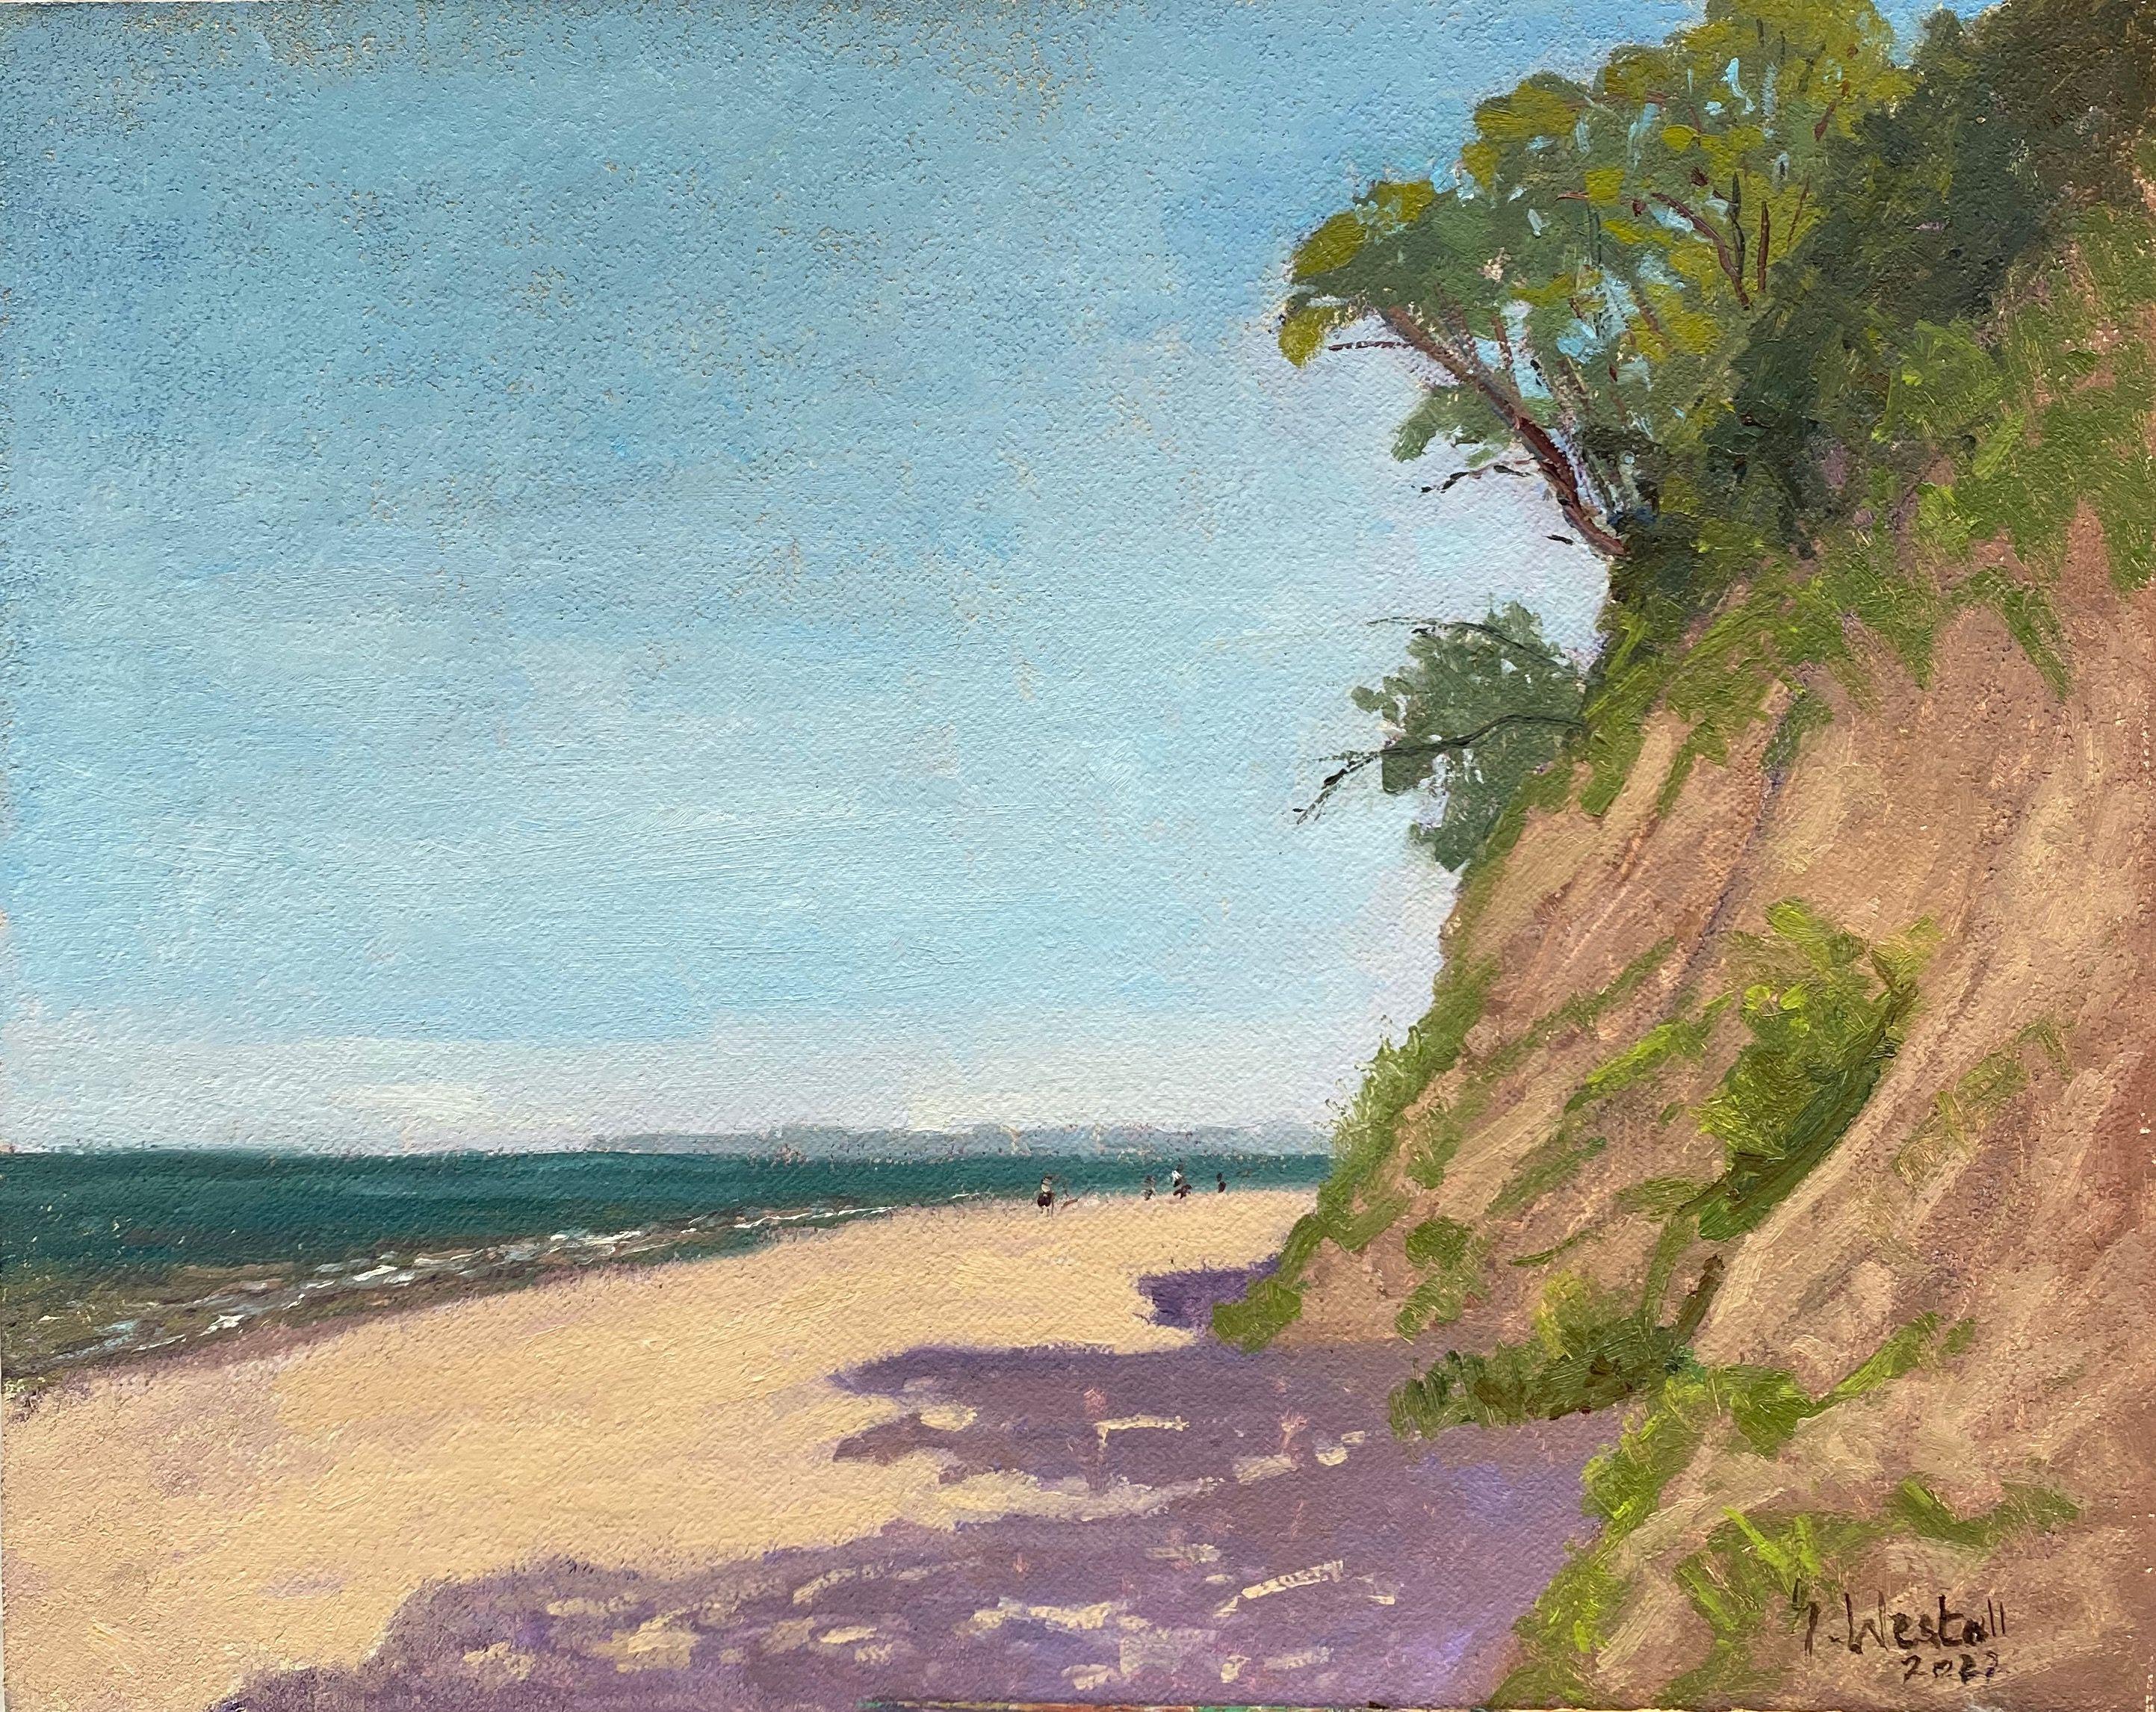 Plein air in Poland, 2022.  The first Plein air painting of a total of 12 paintings painted on my painting trip to Poland, West Pomerania.  I discovered this beach accidentally and was immediately drawn to the shadow colors and since I haven't